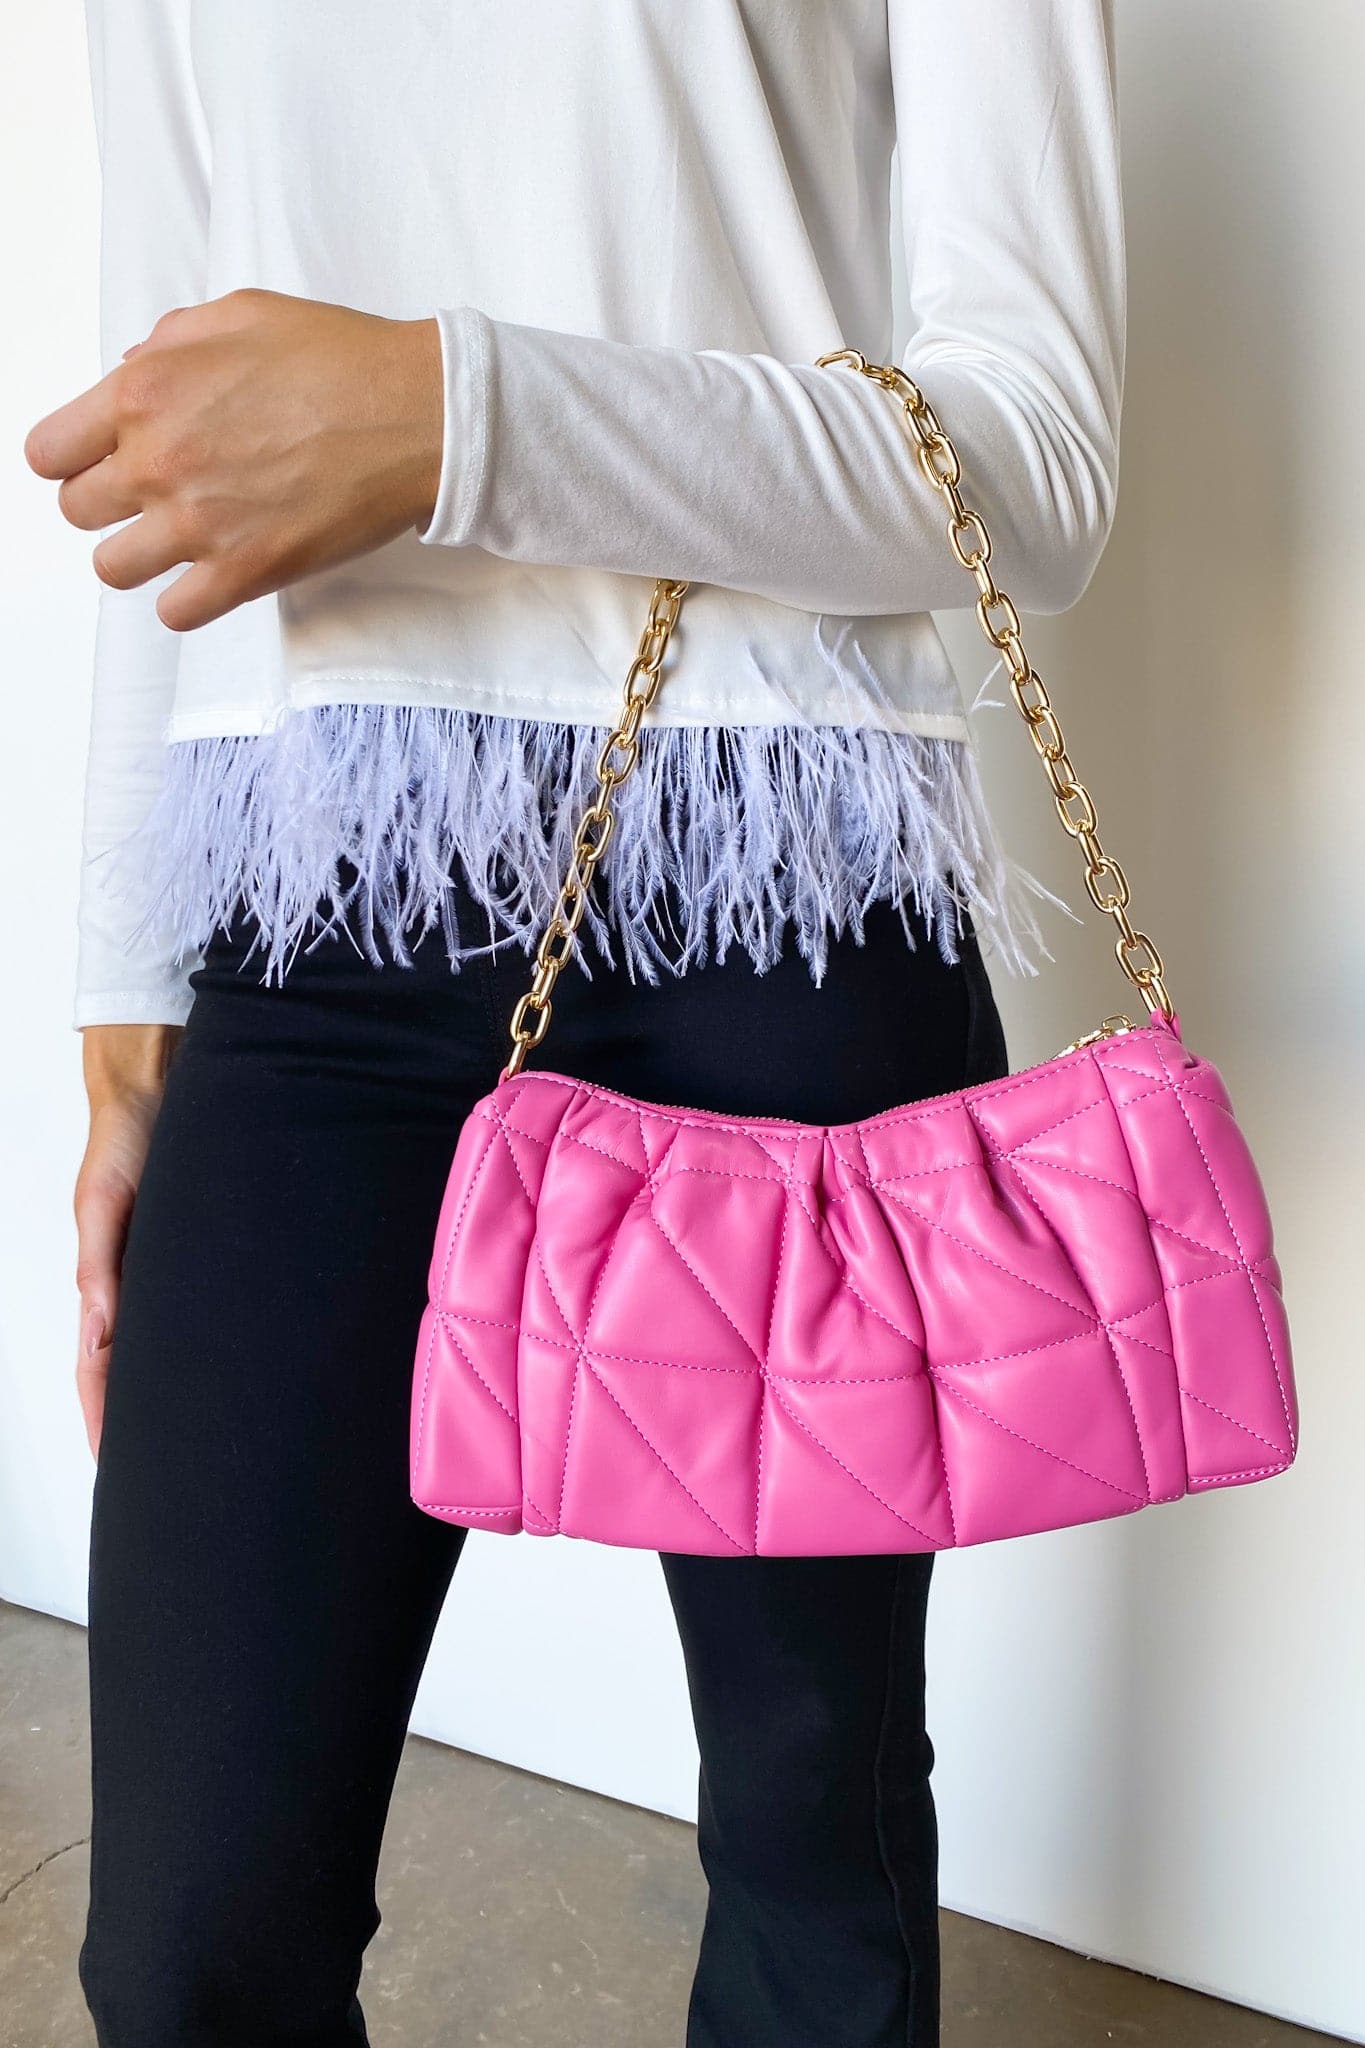  Chic Destinations Quilted Chain Bag - FINAL SALE - Madison and Mallory